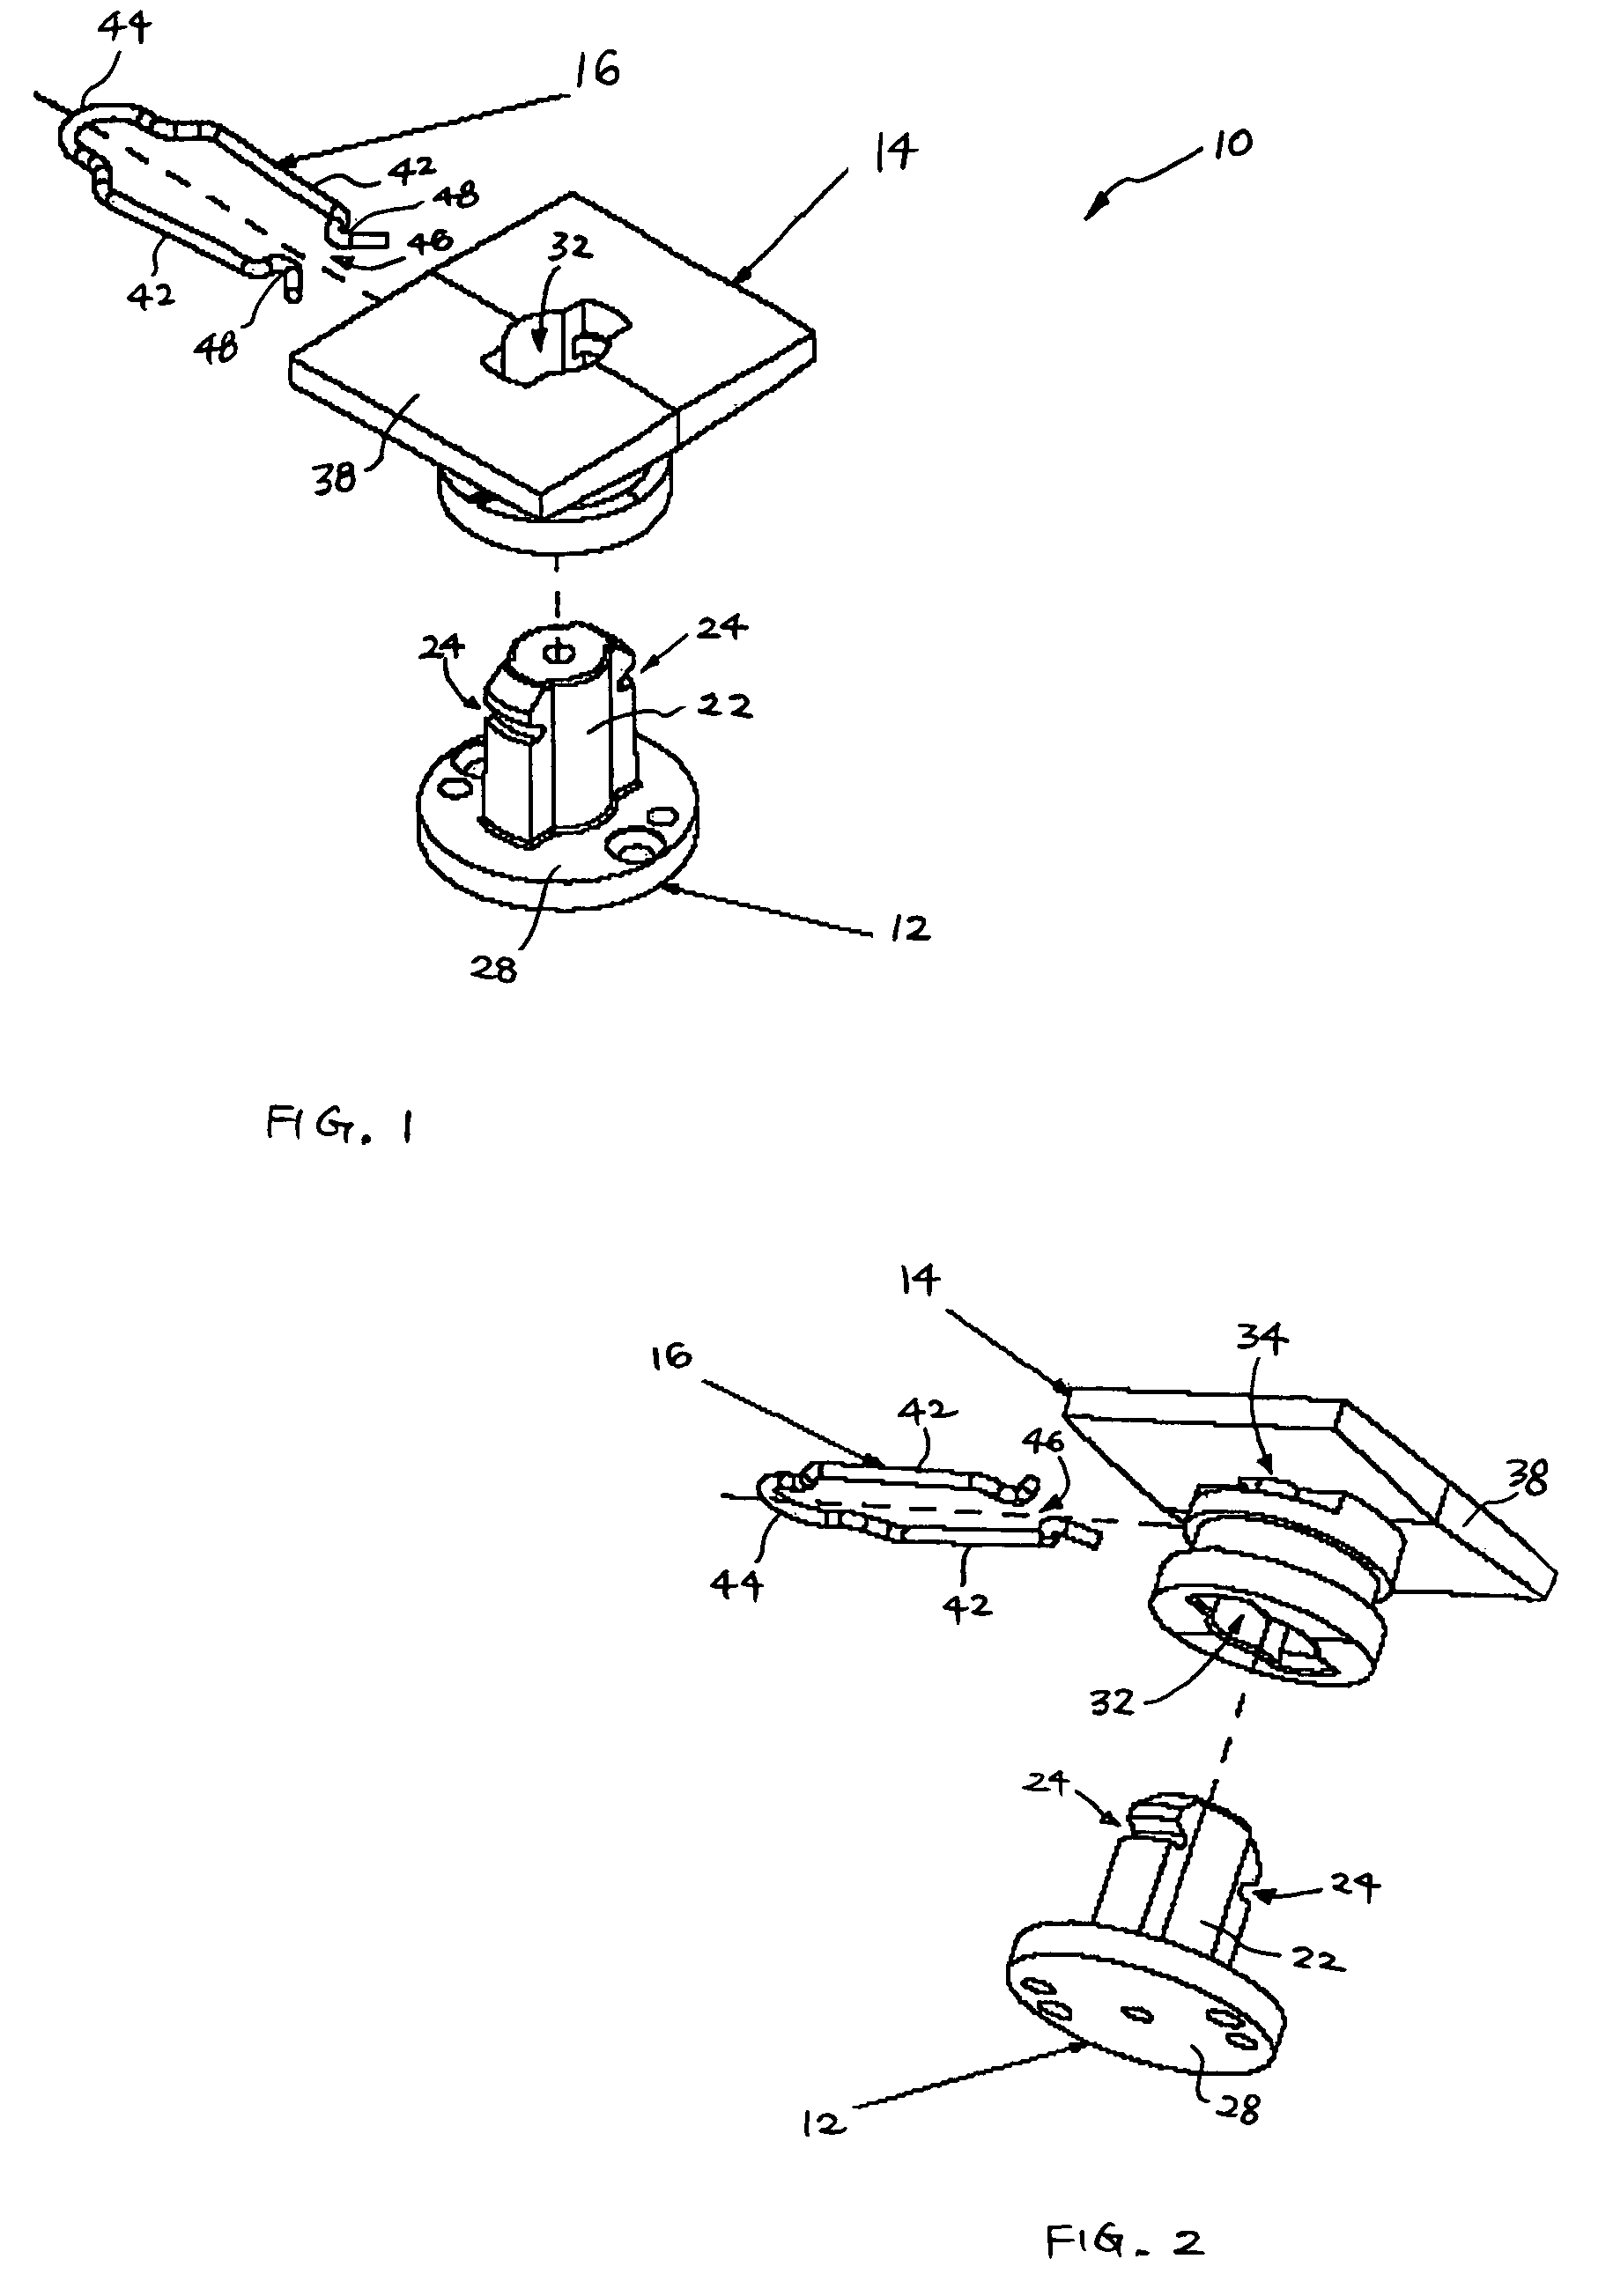 Spring loaded attachment mechanism for camera and base